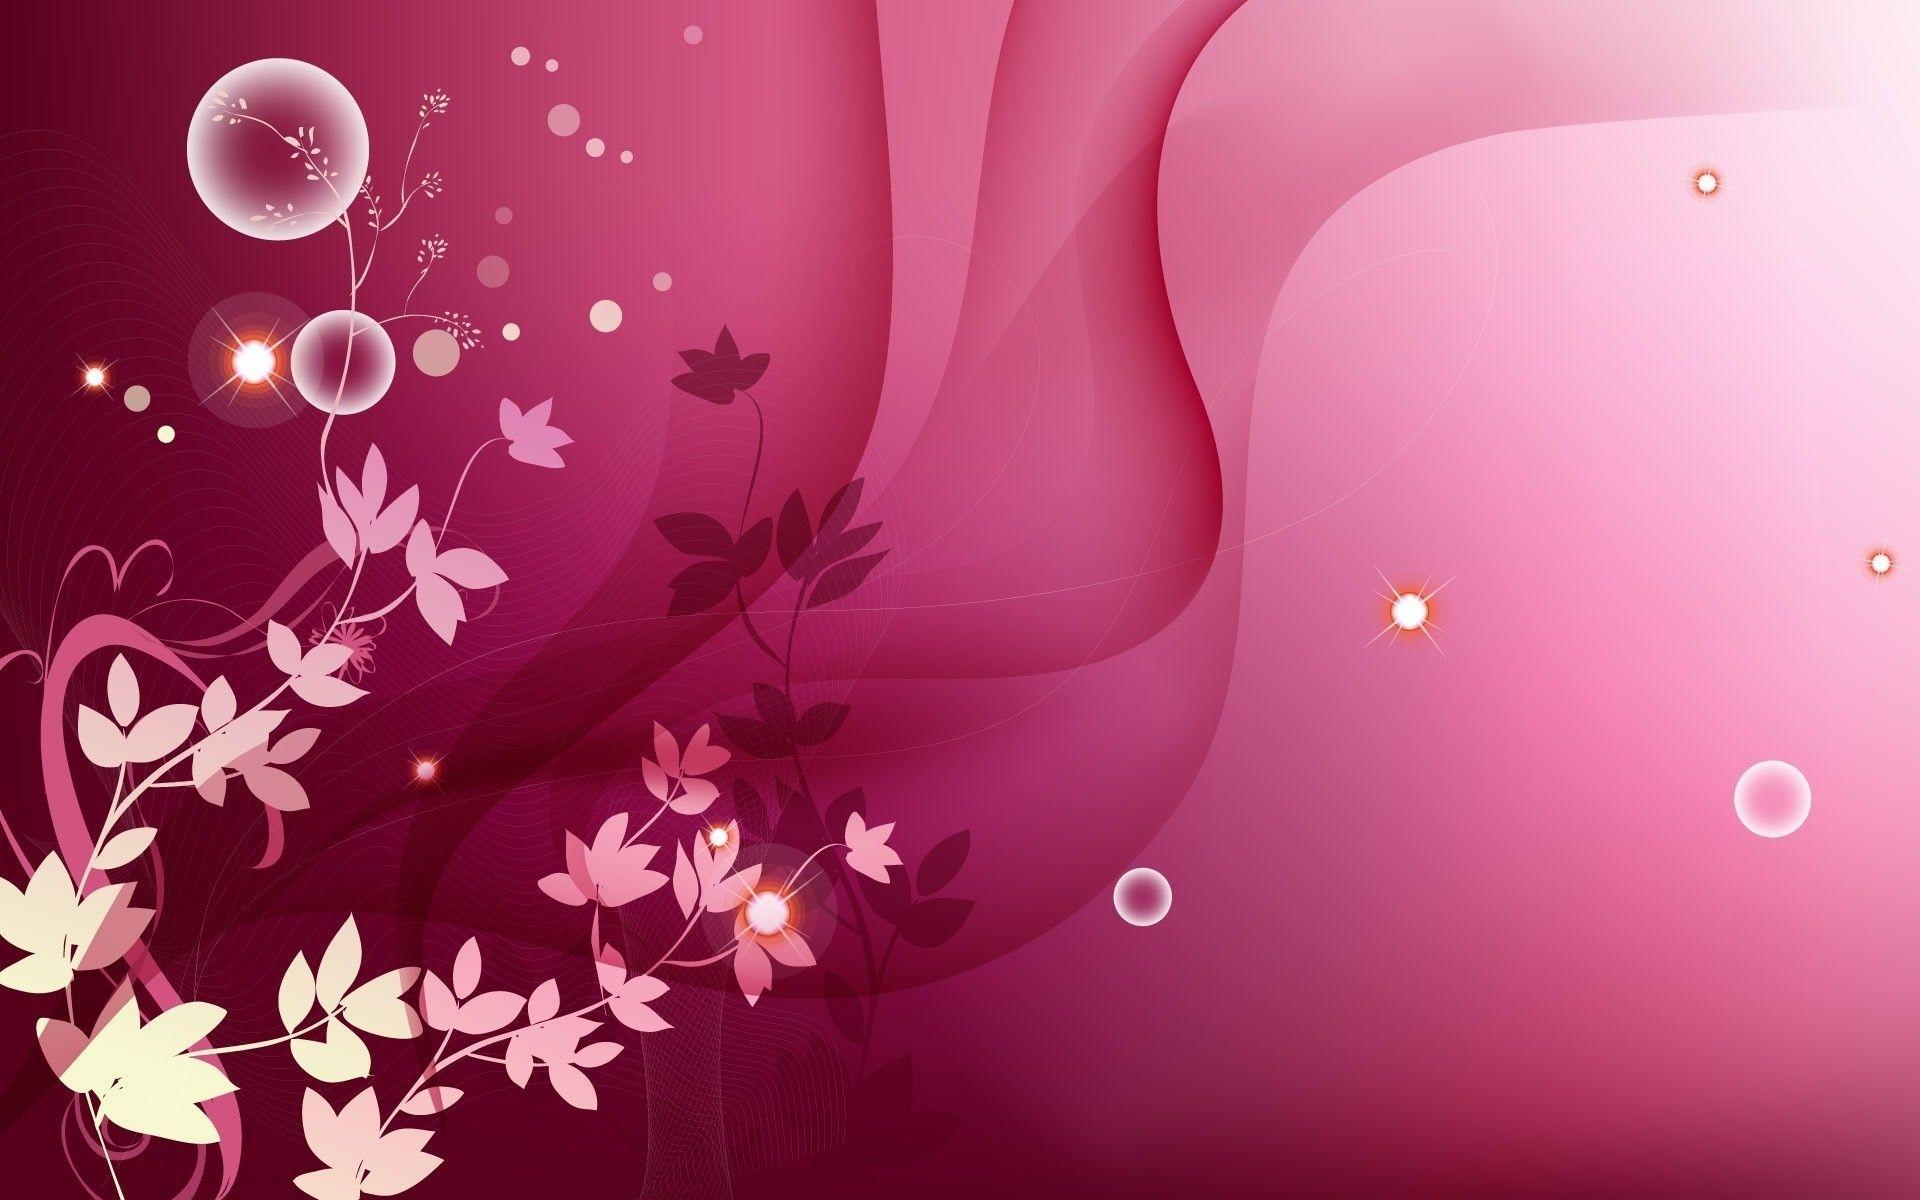 A pink abstract wallpaper with flowers and bubbles - Magenta